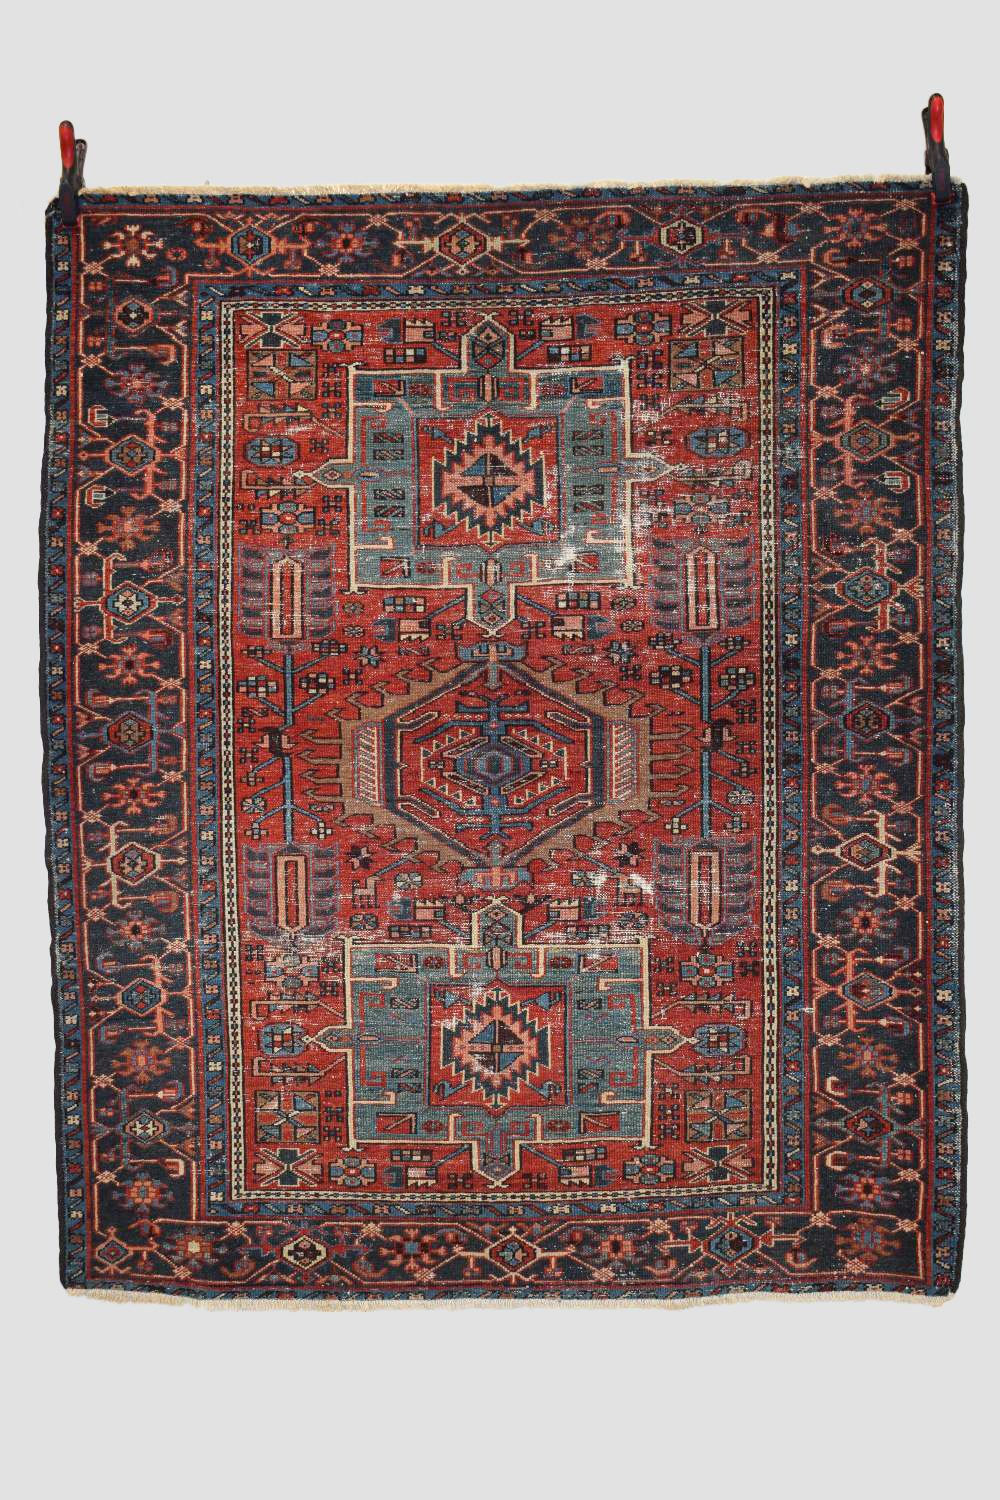 Karaja rug, north west Persia, circa 1930s-40s, 5ft. 11in. X 4ft. 11in. 1.80m. X 1.50m. Overall